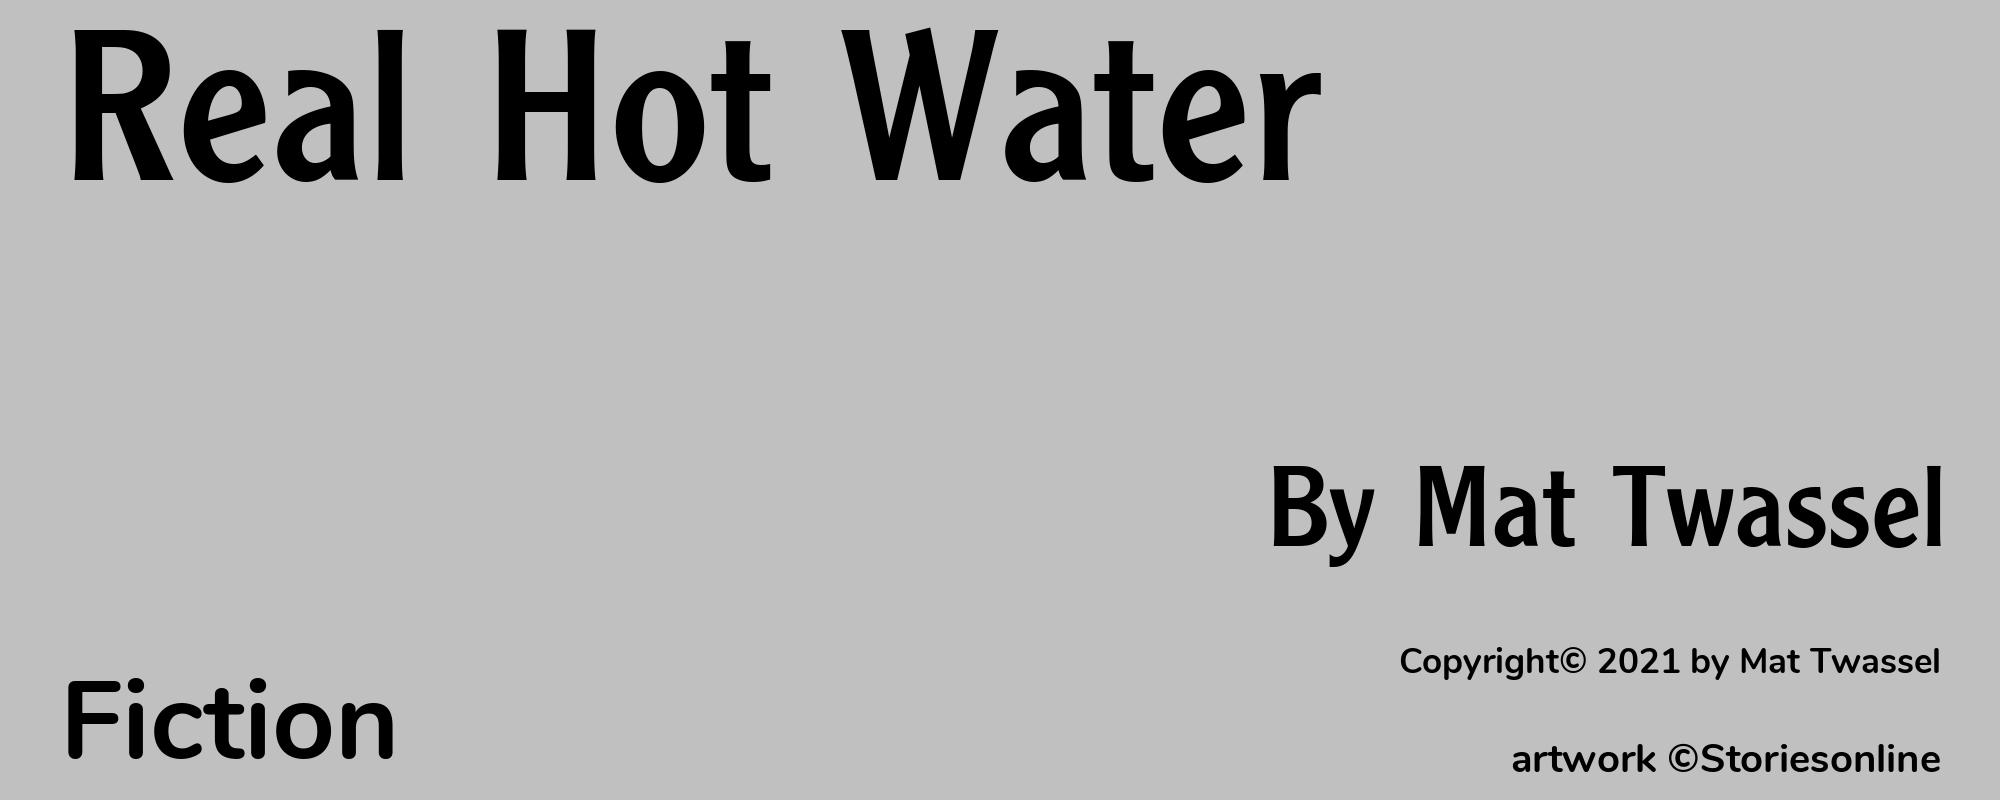 Real Hot Water - Cover